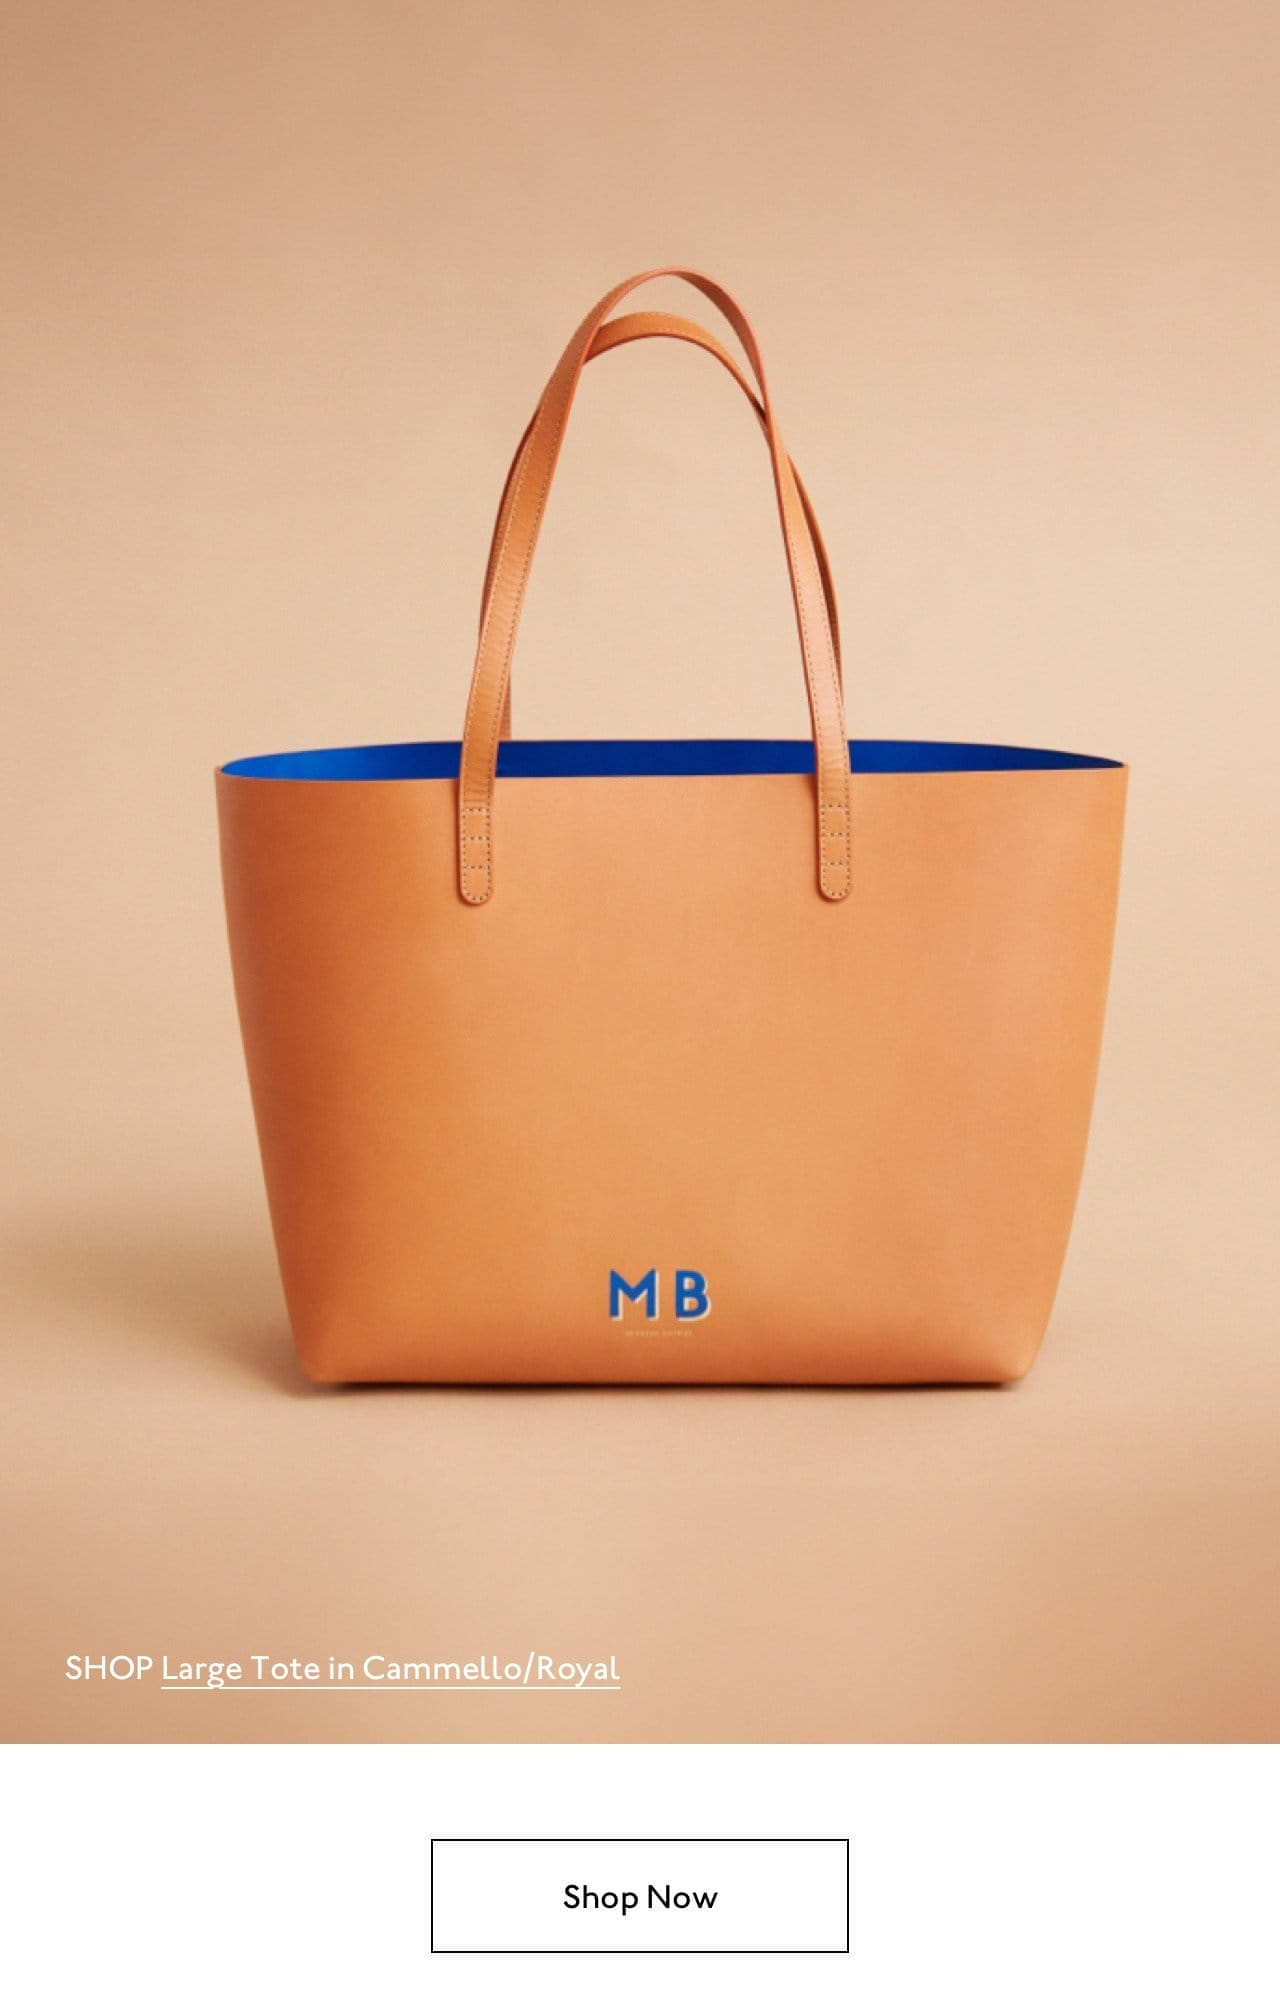 Shop our monogrammable totes now and receive up to three complimentary hand painted letters with your purchase. Pictured: Large Tote in Cammello/Royal with a monogram.